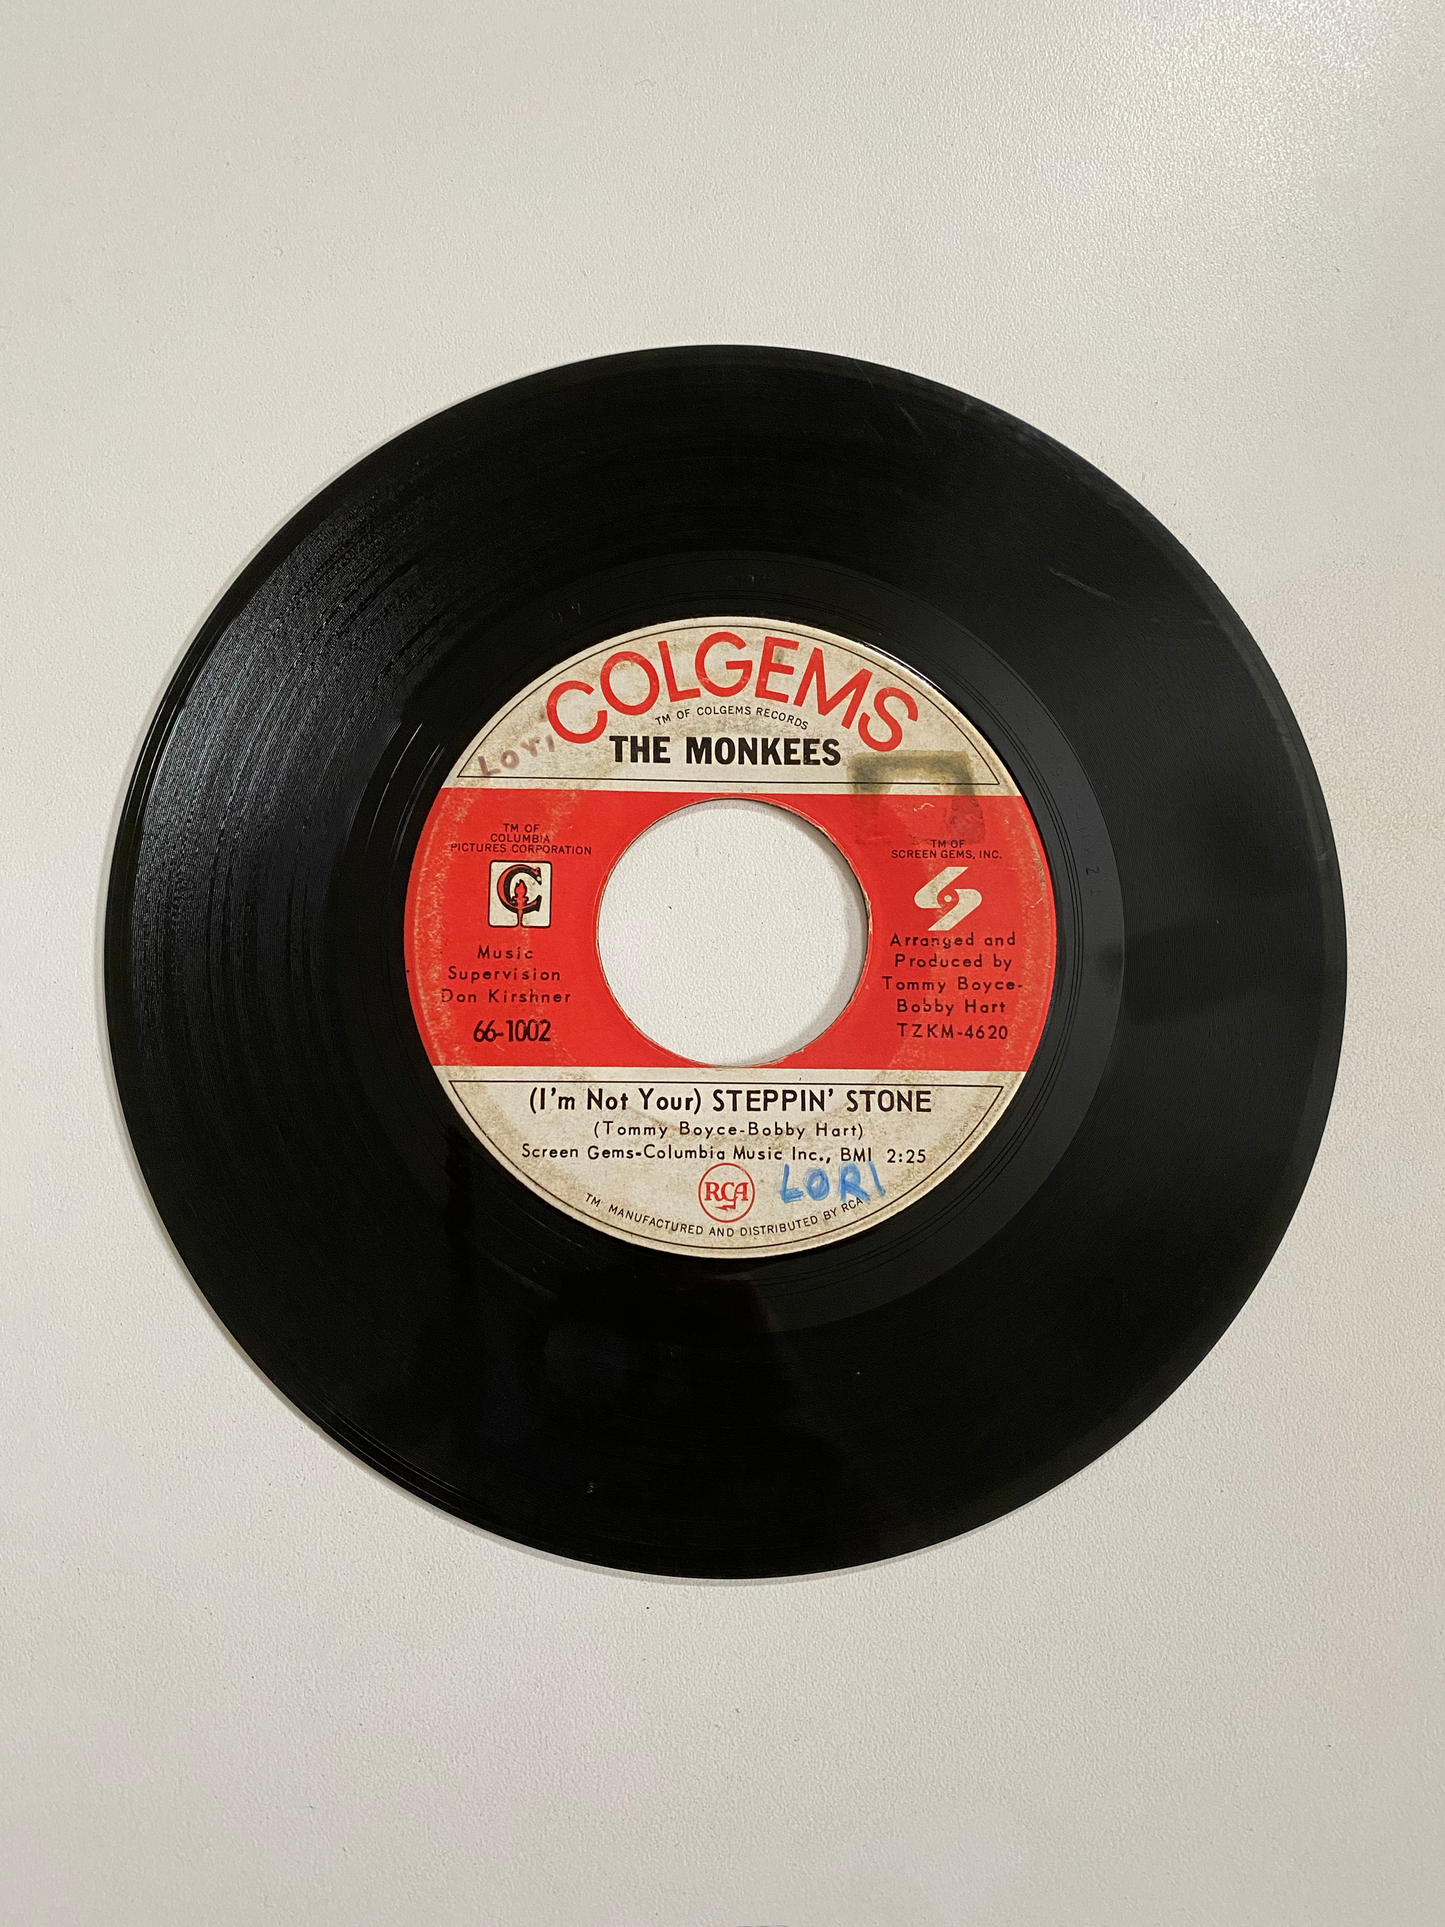 Monkees, The - I'm A Believer | 45 The Vintedge Co.